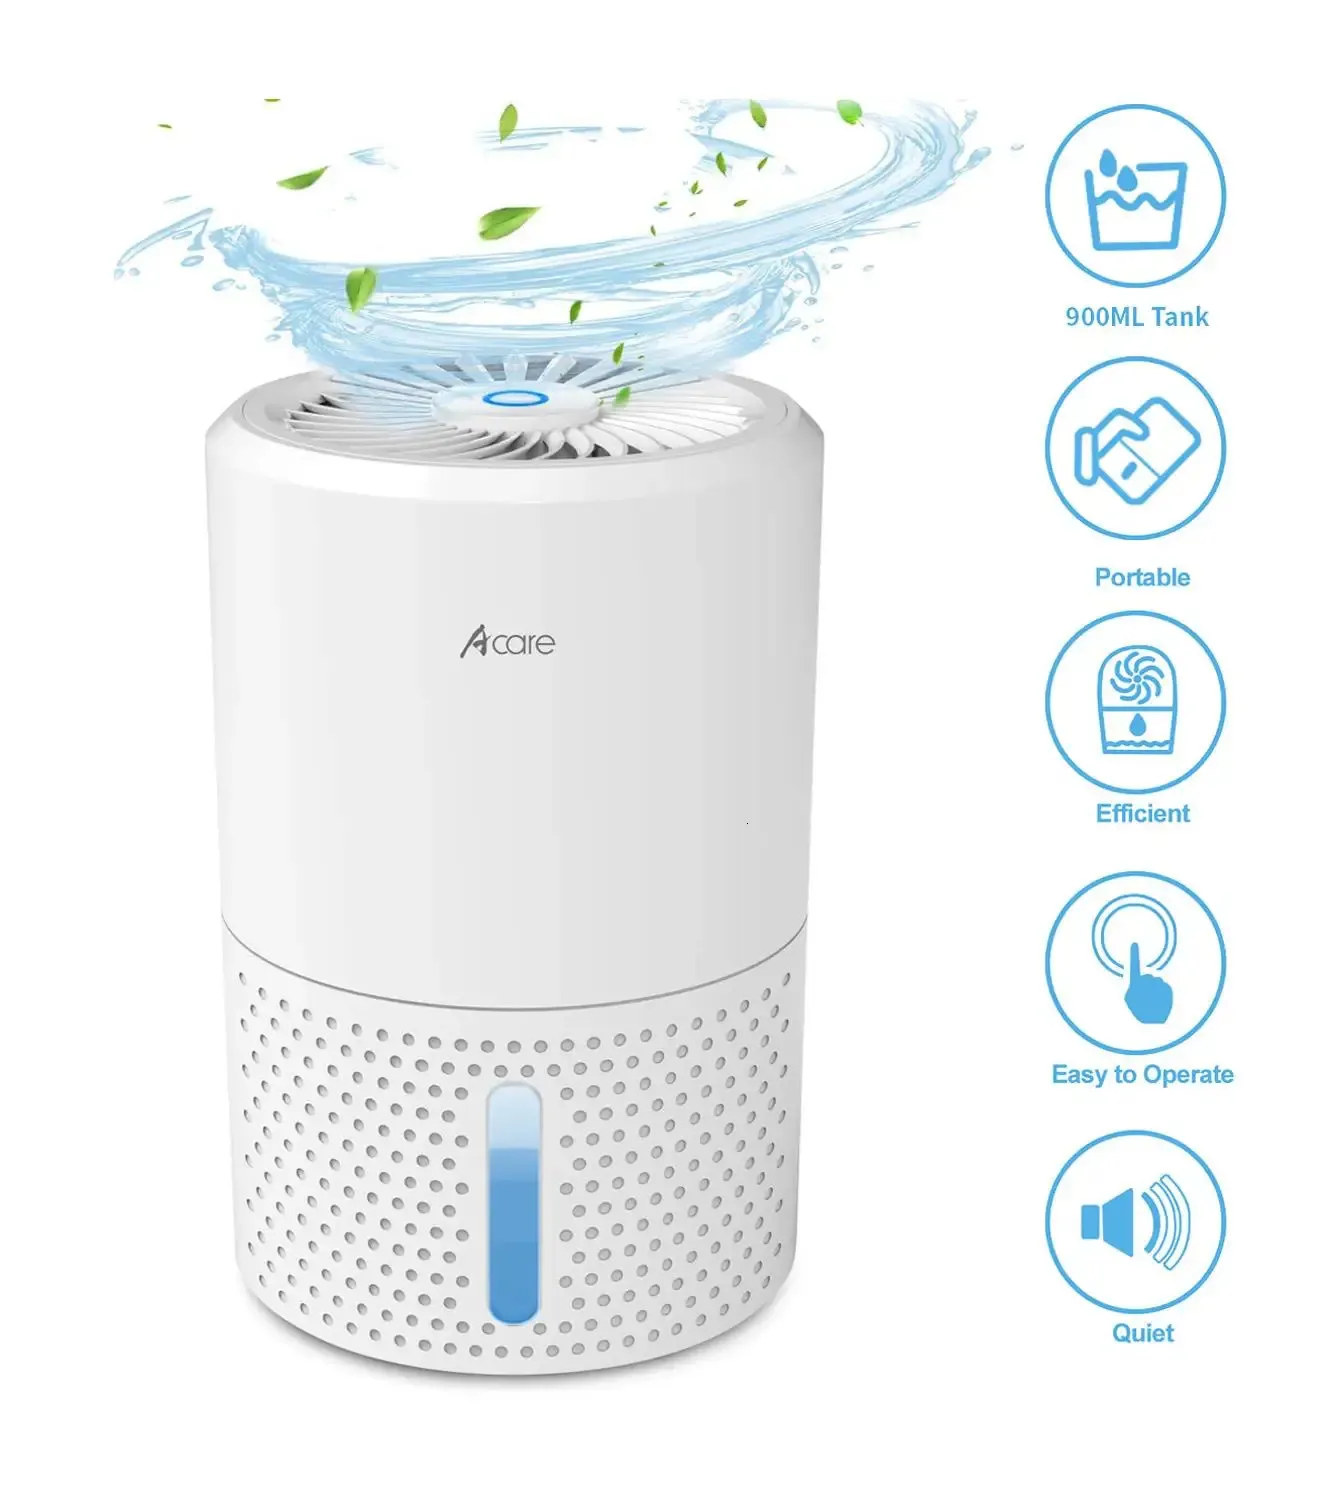 Other Home Garden Acare Dehumidifier Moisture Absorbers Air Dryer with 900ml Water Tank Quiet for Basement Bathroom Wardrobe 231211